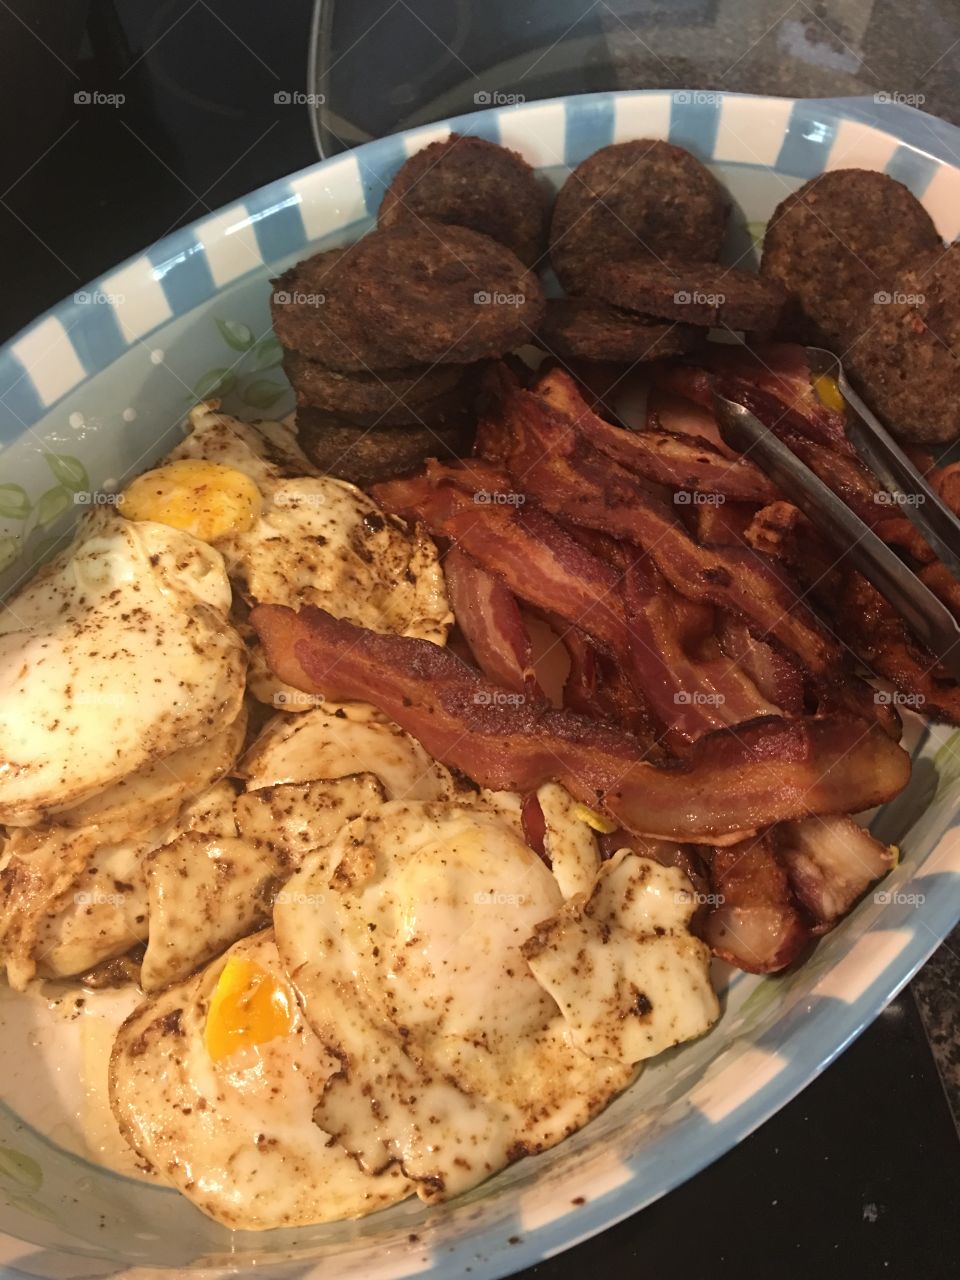 Egggs bacon and sausage 